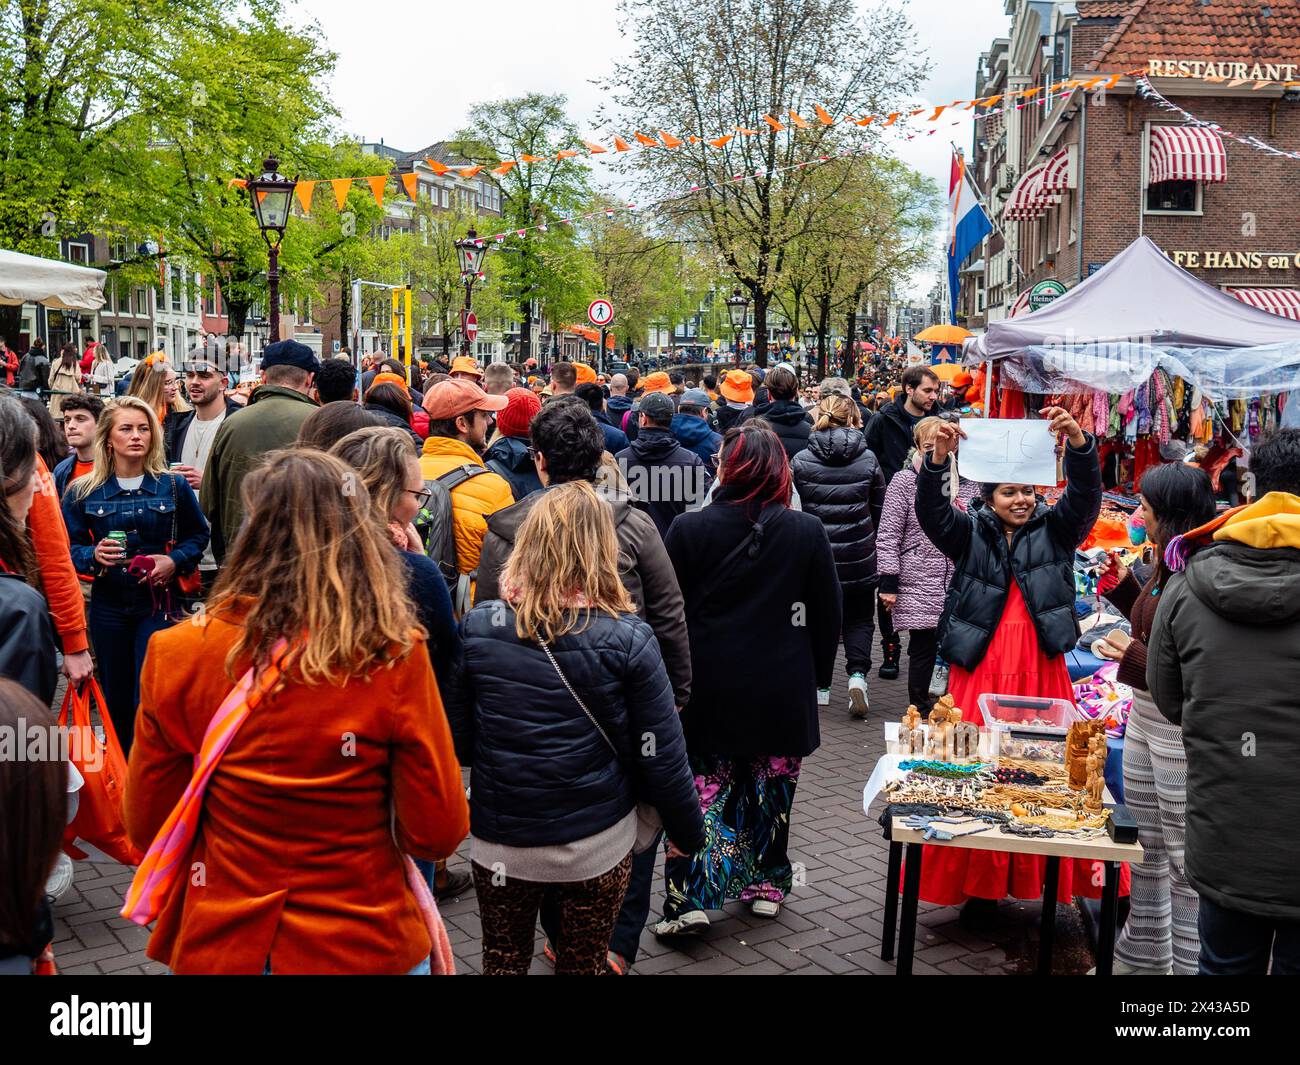 April 27th, Amsterdam. King's Day is renowned for being one of the biggest and most colorful festivities in the country, especially in Amsterdam. The city is bursting with orange as people enjoy the biggest street party of the year, enjoying the free markets and having fun on the boats along the canals. Stock Photo